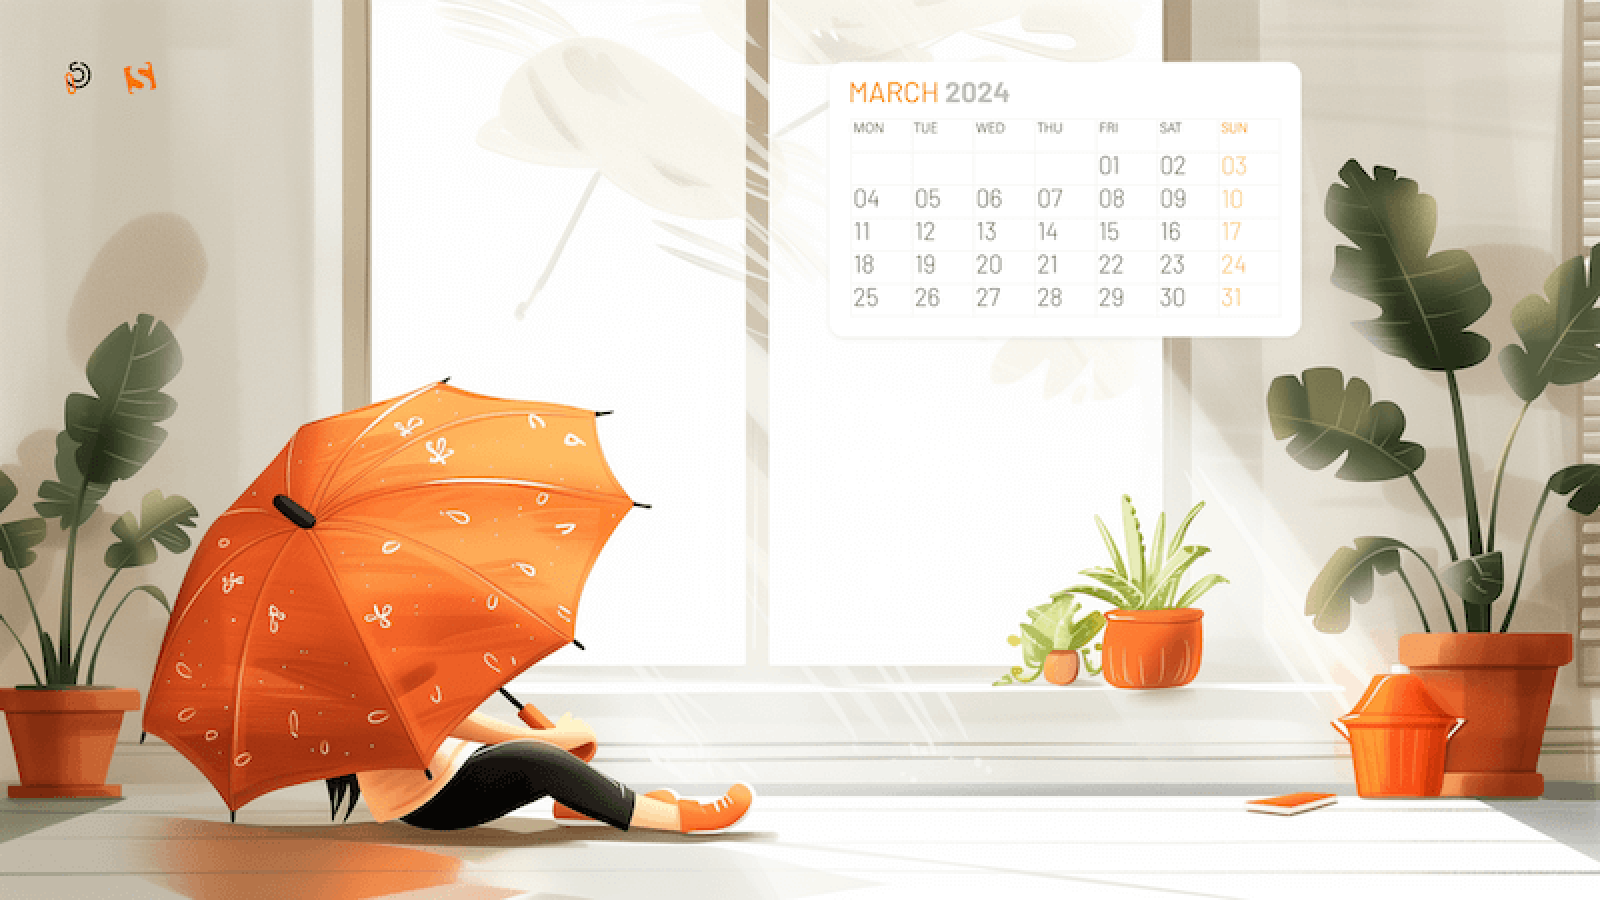 Ready For Spring (March 2024 Wallpapers Version)